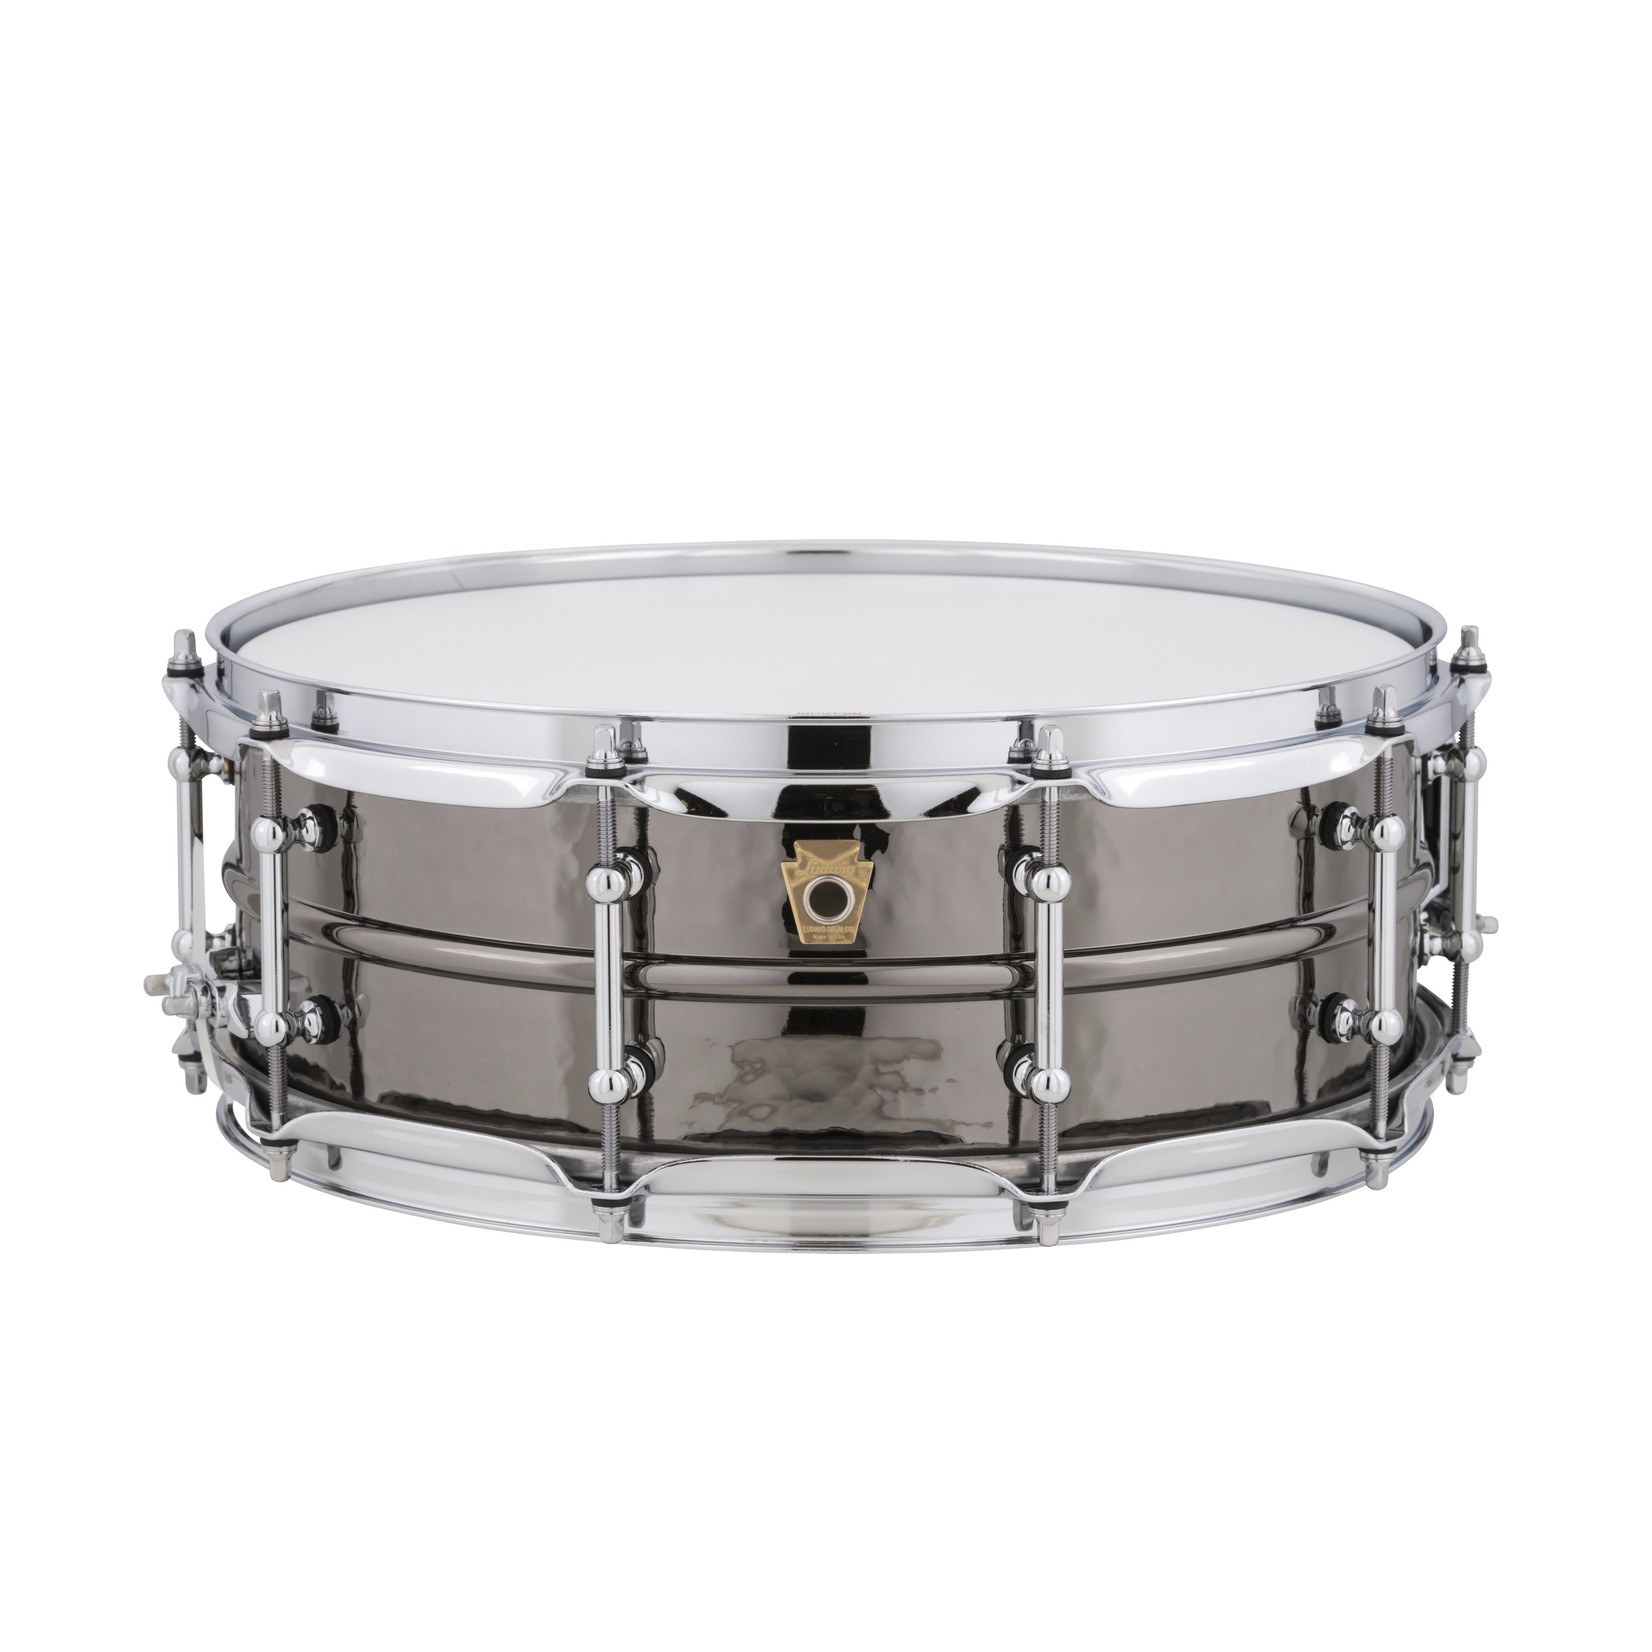 Ludwig Ludwig 5X14 Supraphonic “Black Beauty” Snare Drum / Tube Lugs / Hammered Shell